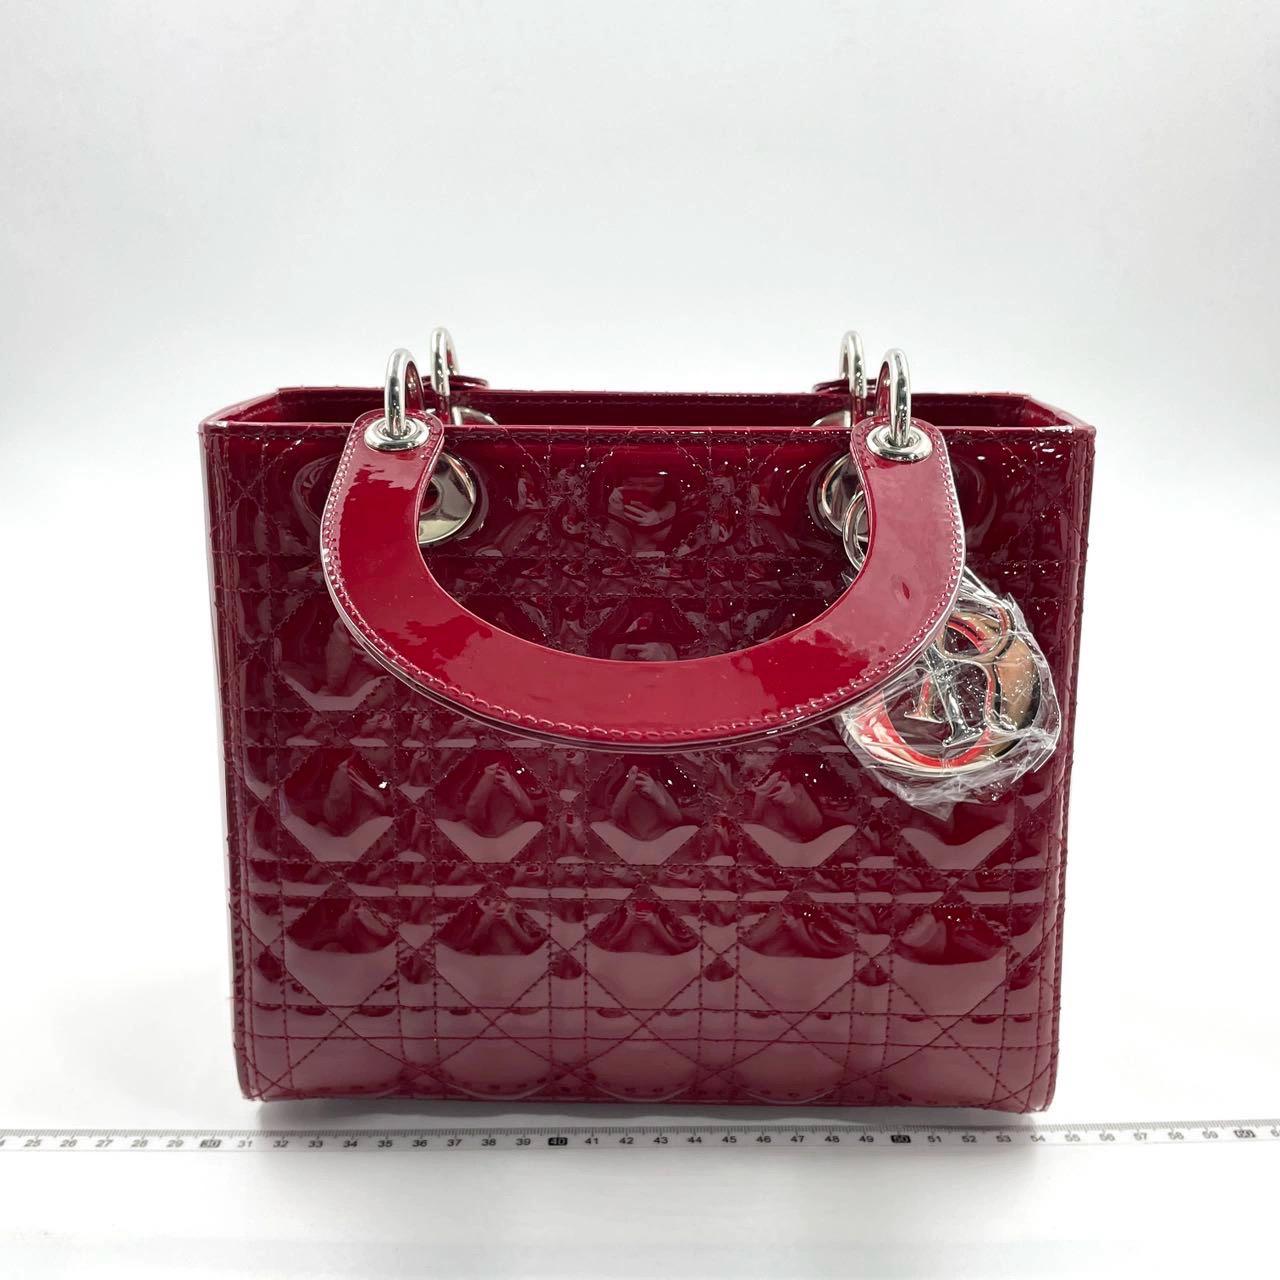 Lady Dior 2017 Medium Burgundy Patent Leather Handbag Adjustable Strap In Excellent Condition For Sale In AUBERVILLIERS, FR